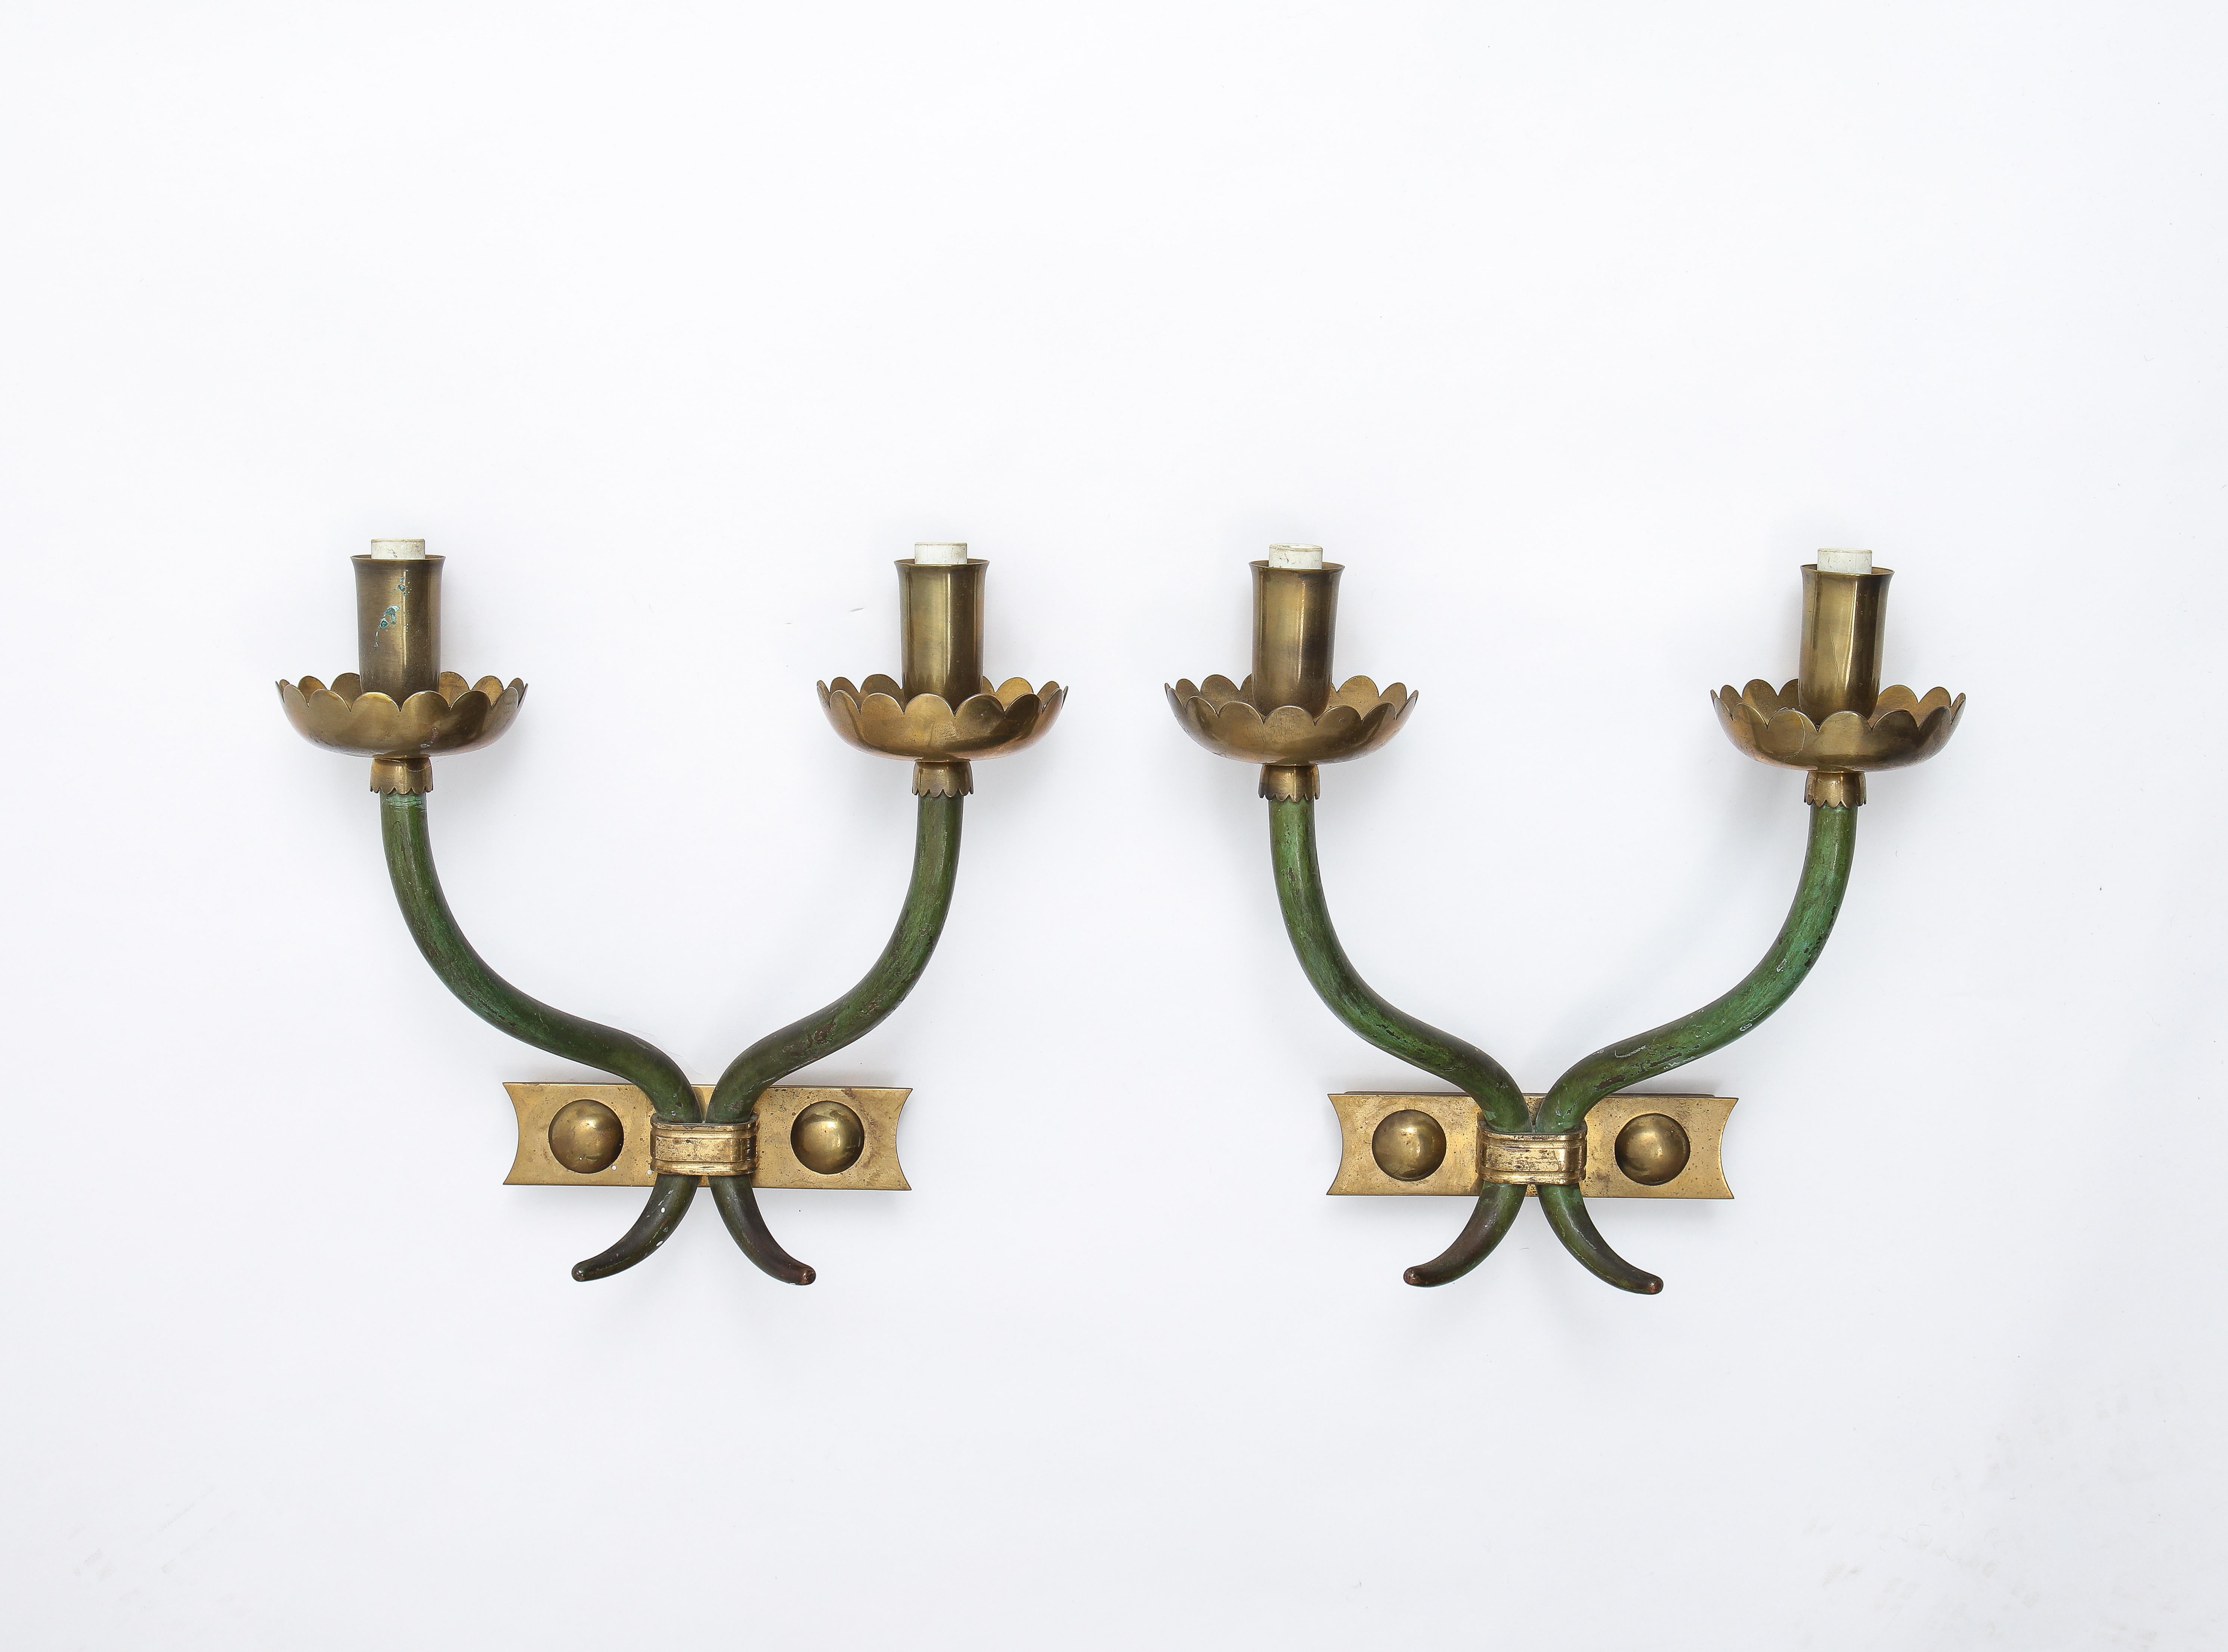 Pair of neoclassic sconces with two lights. Bronze swooping arms with verdigris patina and ornate brass details. Rewired.